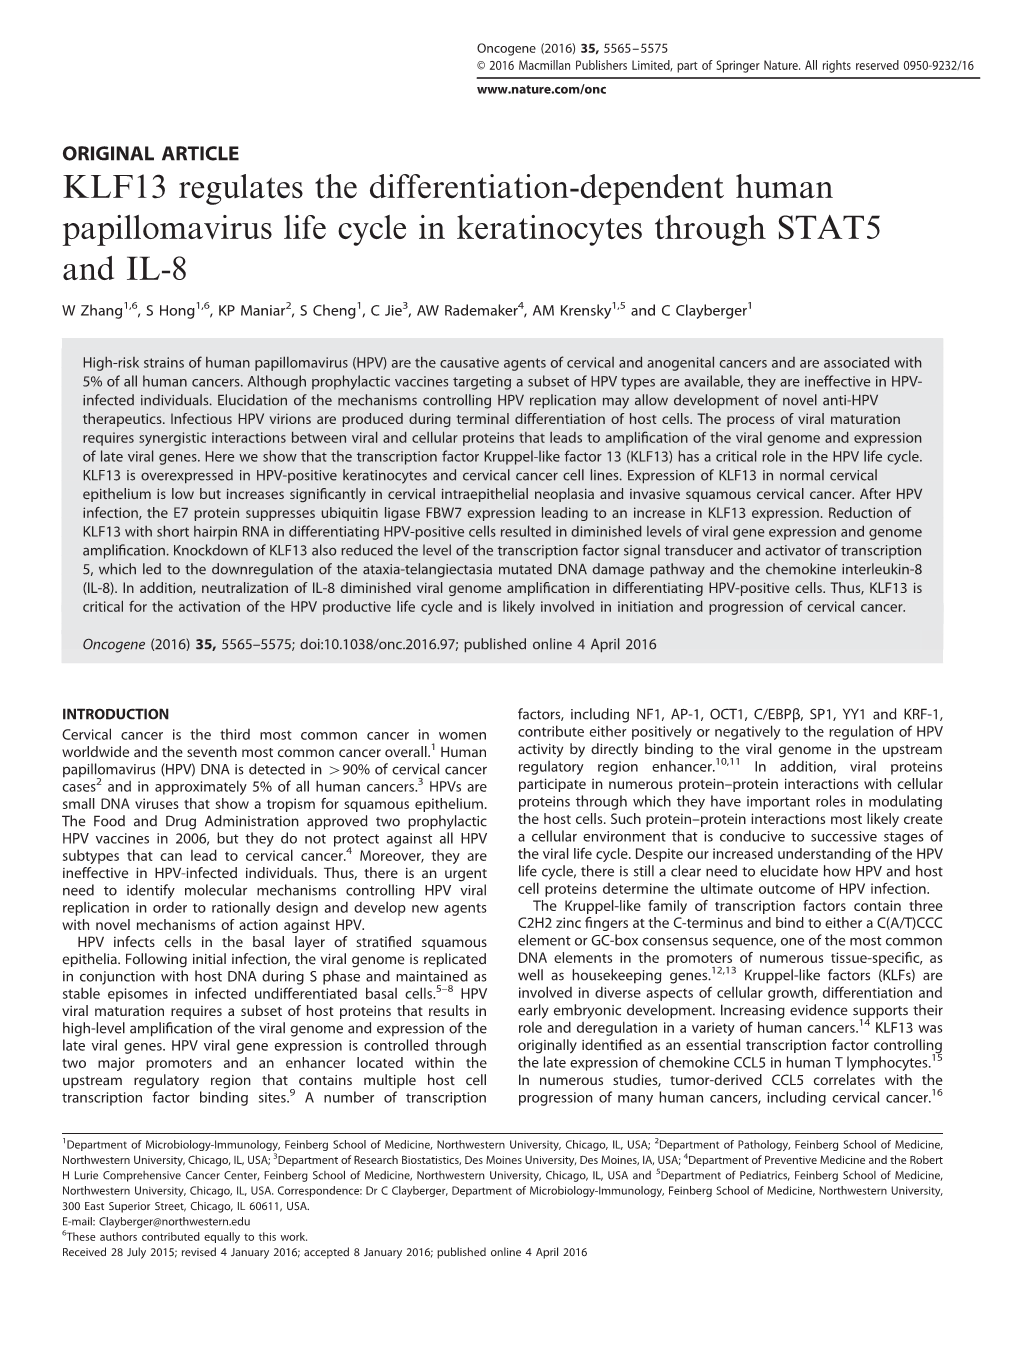 KLF13 Regulates the Differentiation-Dependent Human Papillomavirus Life Cycle in Keratinocytes Through STAT5 and IL-8